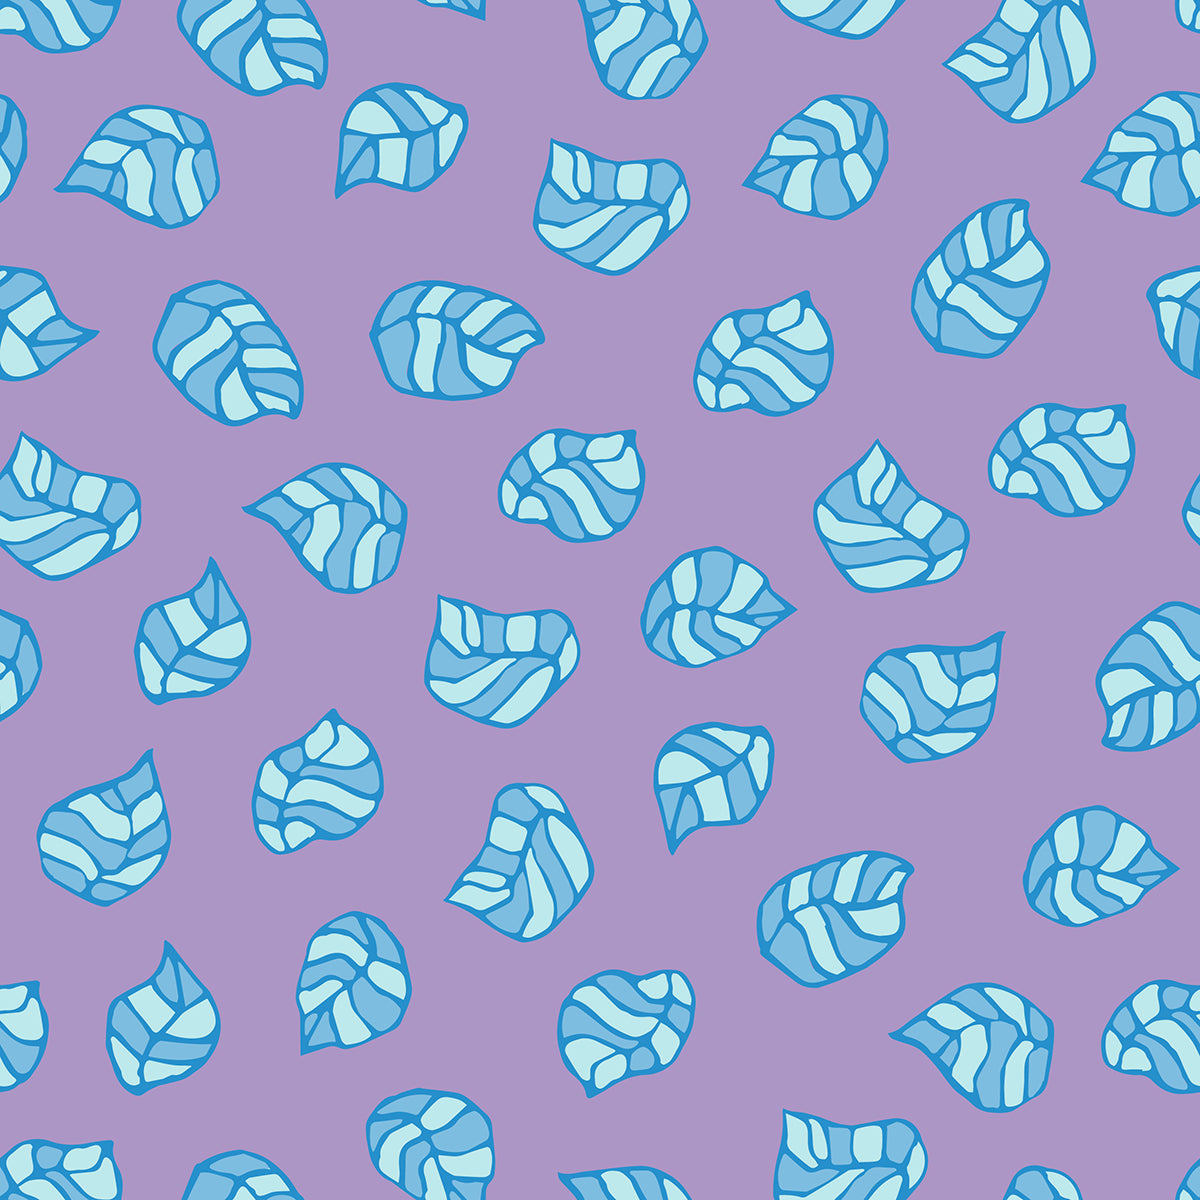 Beach Leaves Pastel features a repeating pattern in purple, blue, and aqua colors of striped leaves that look like they are floating to the ground.